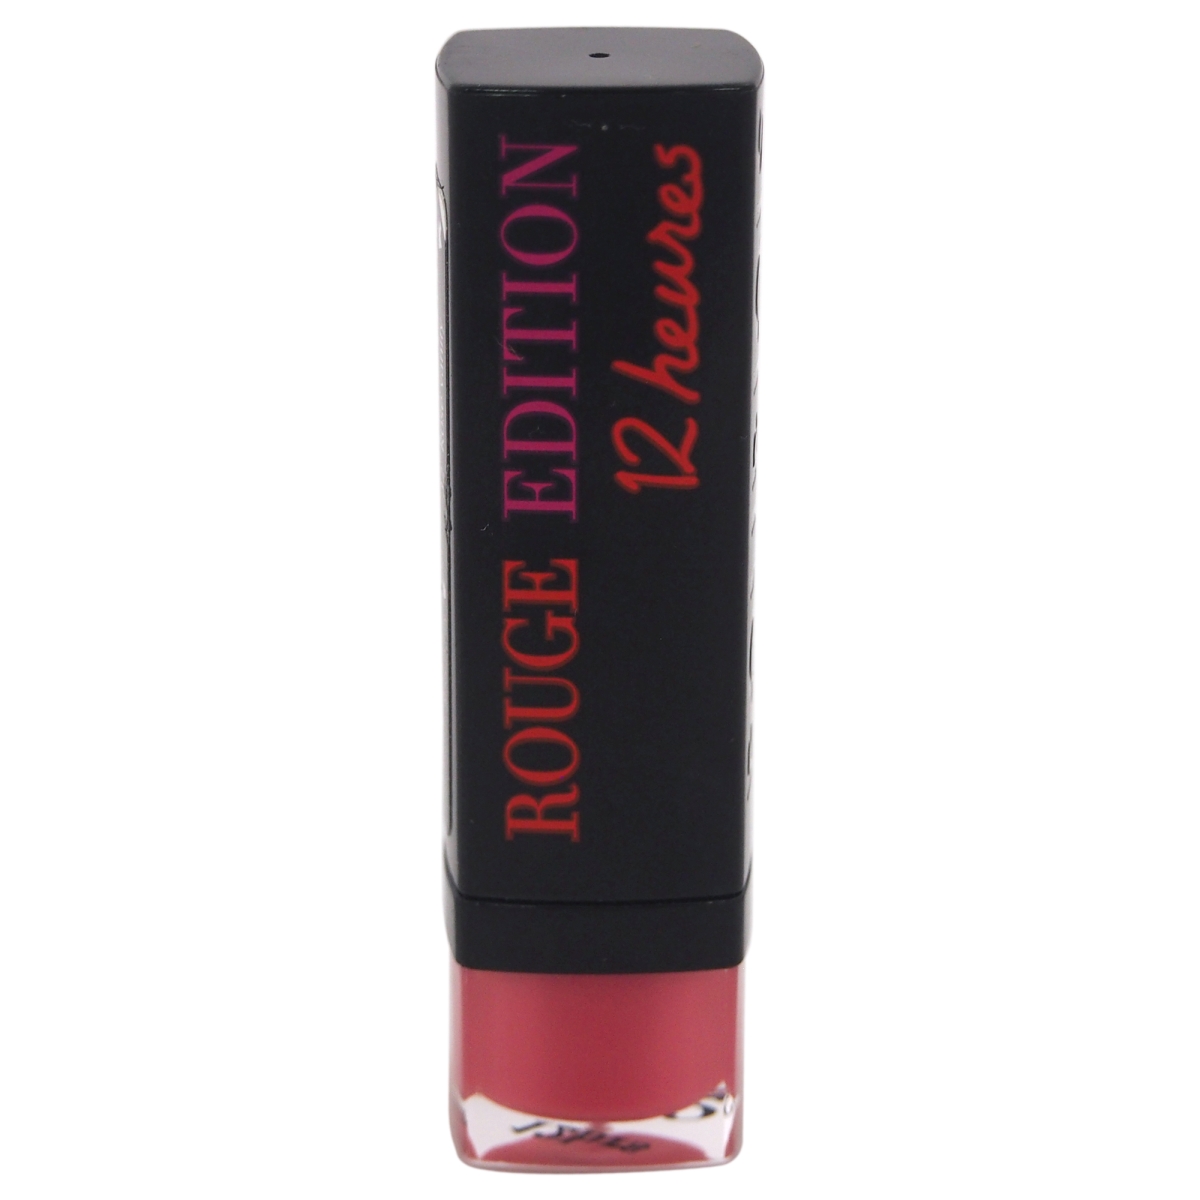 W-c-9705 0.12 Oz No. 32 Rouge Edition 12 Hours Rose Vanity Lipstick For Women